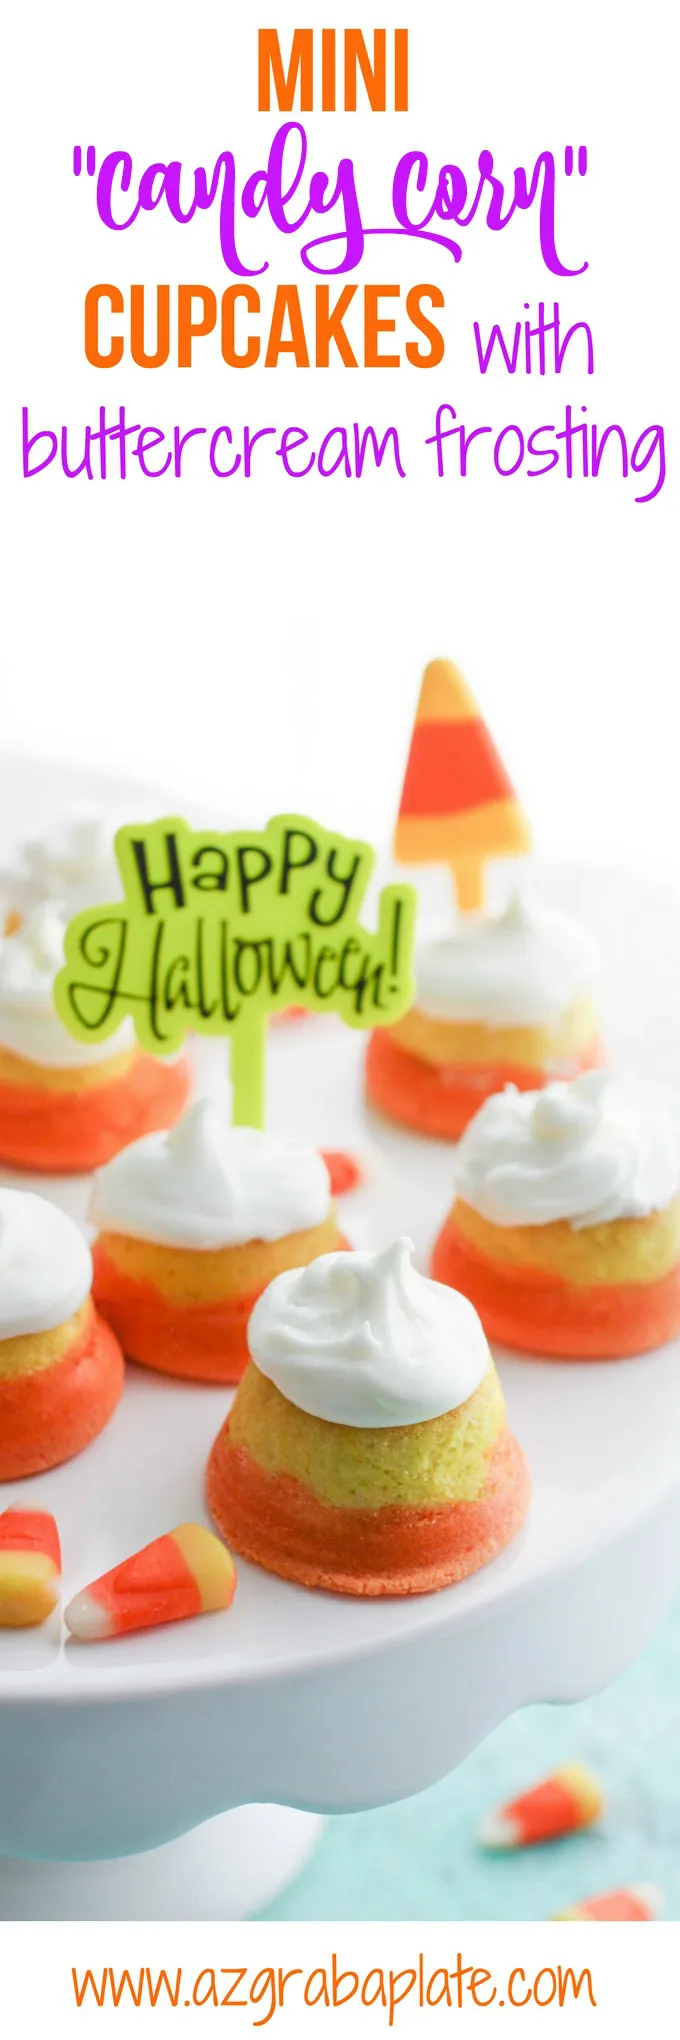 Mini “Candy Corn” Cupcakes with Buttercream Frosting make a fun Halloween dessert. You'll love the looks of these cupcakes, and they taste amazing!